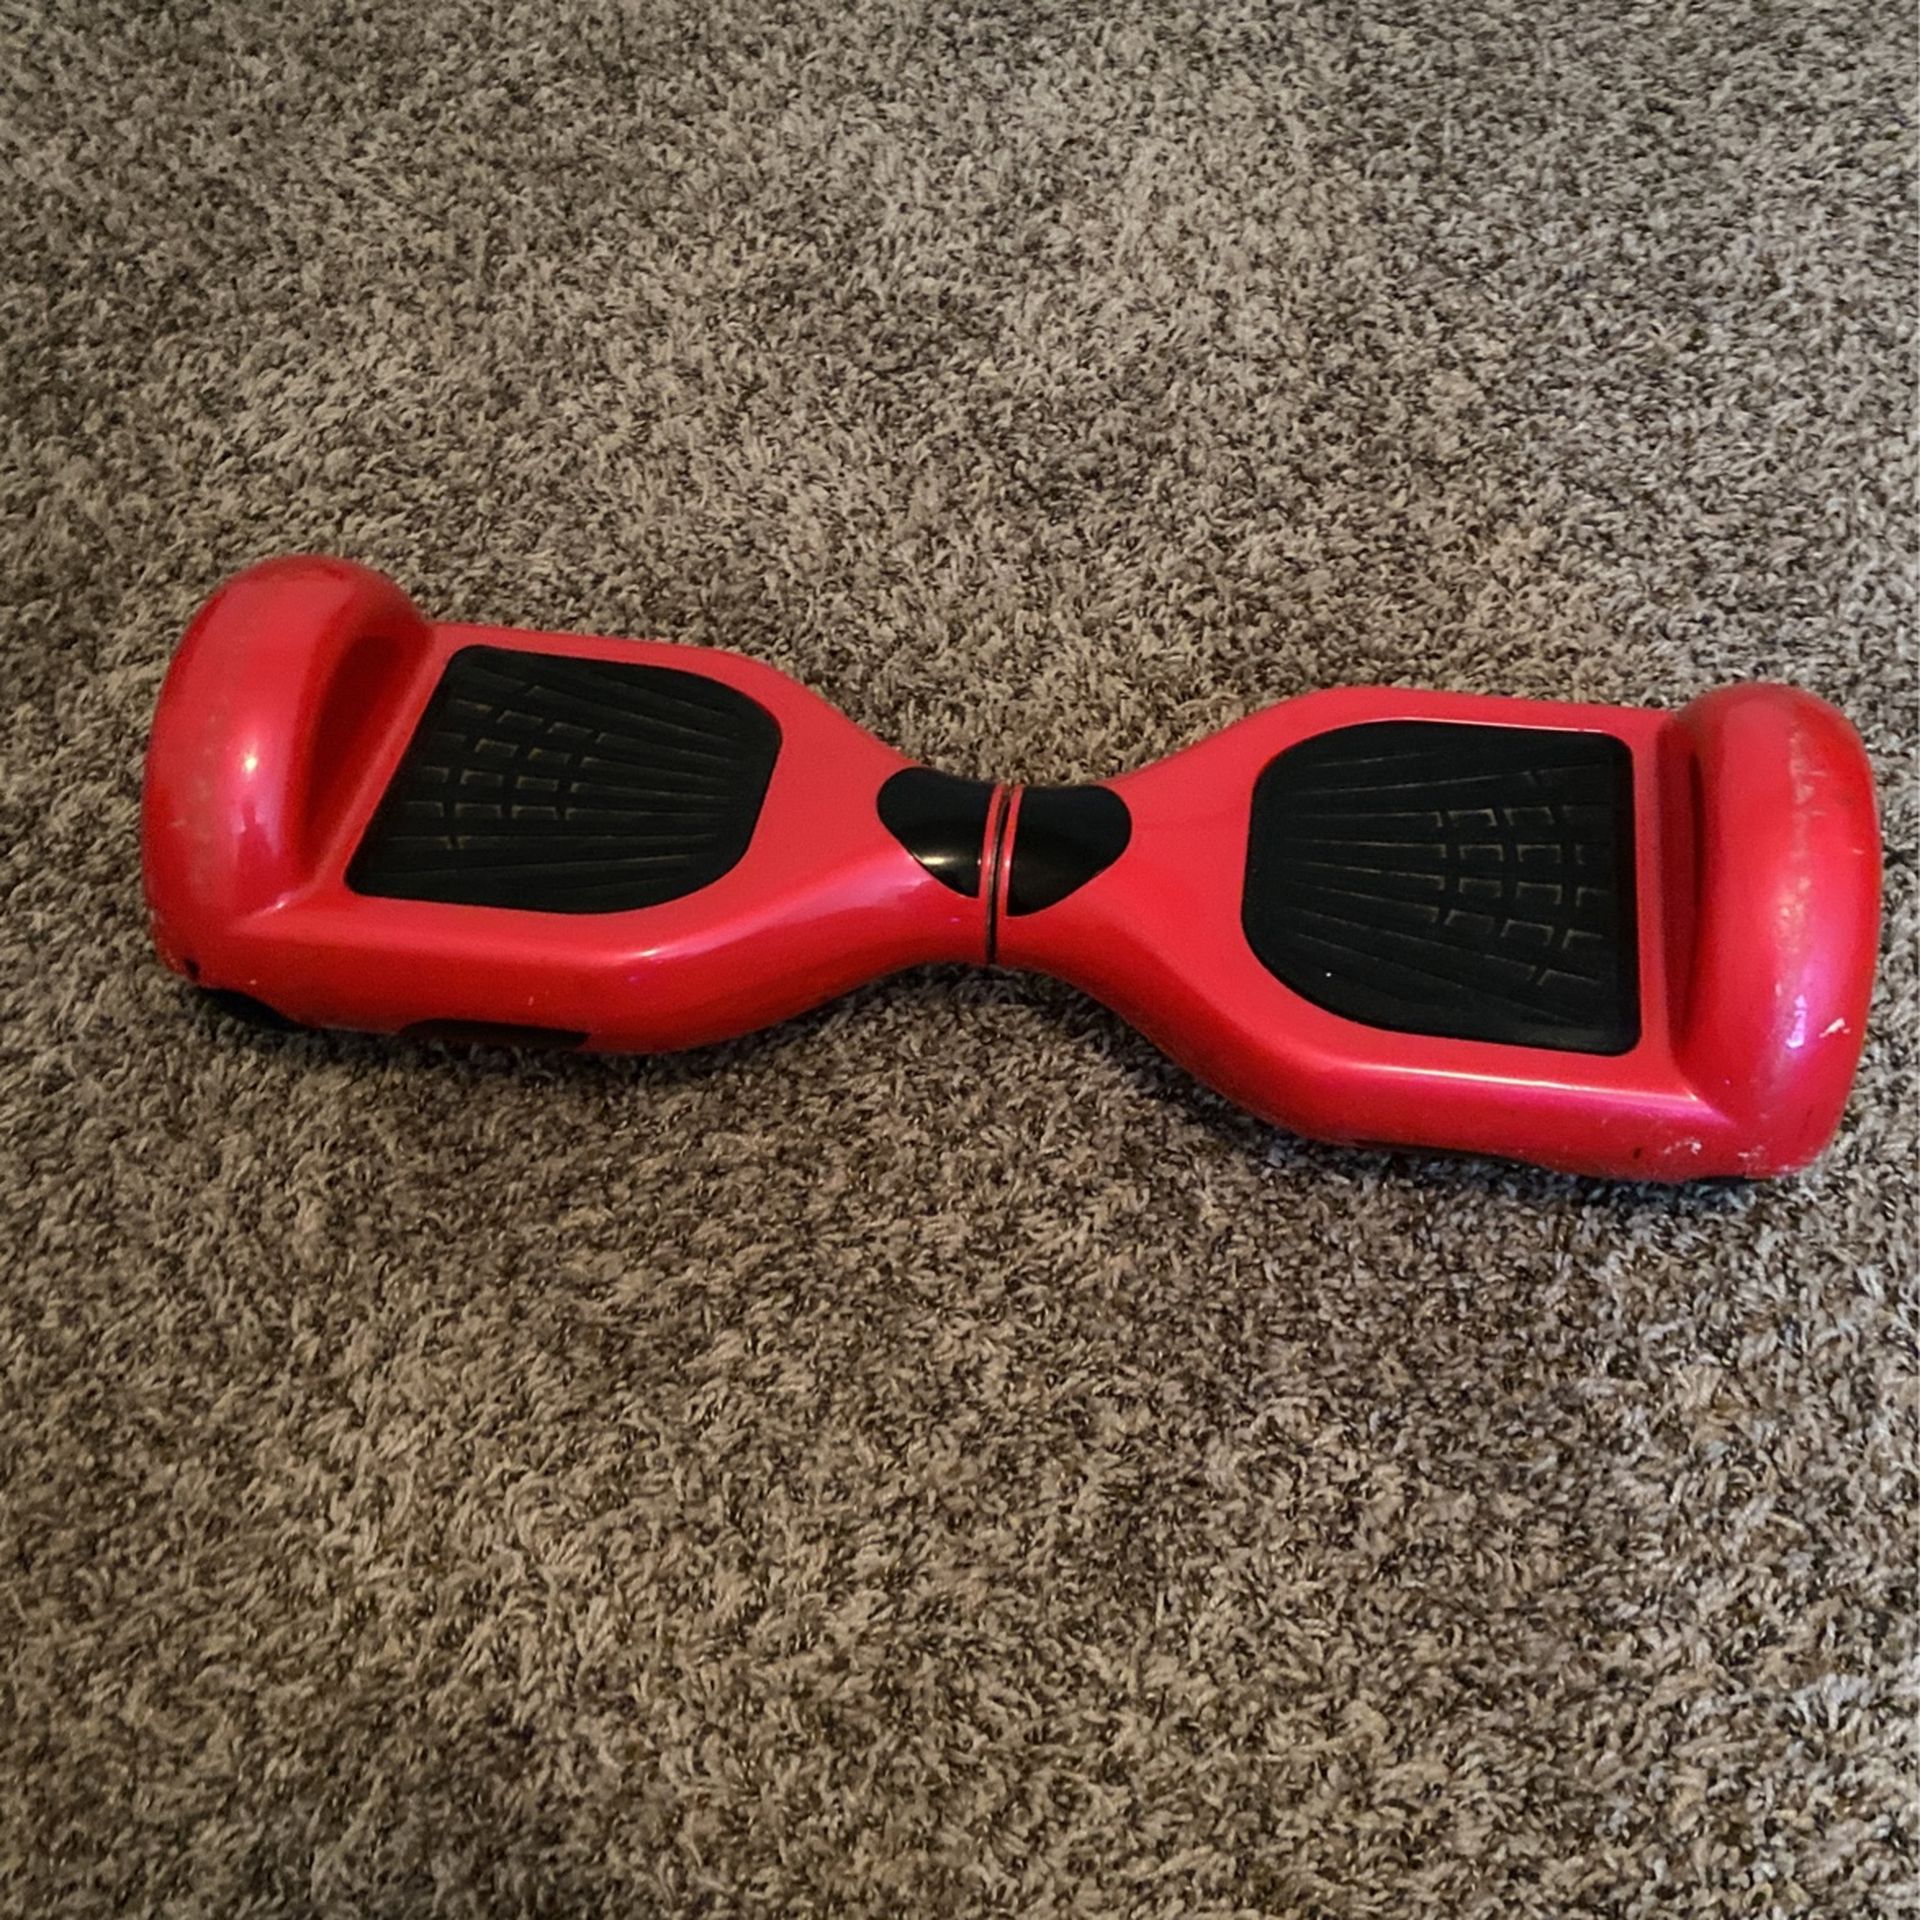 Red Bluetooth Hoverboard (Scratches On It)